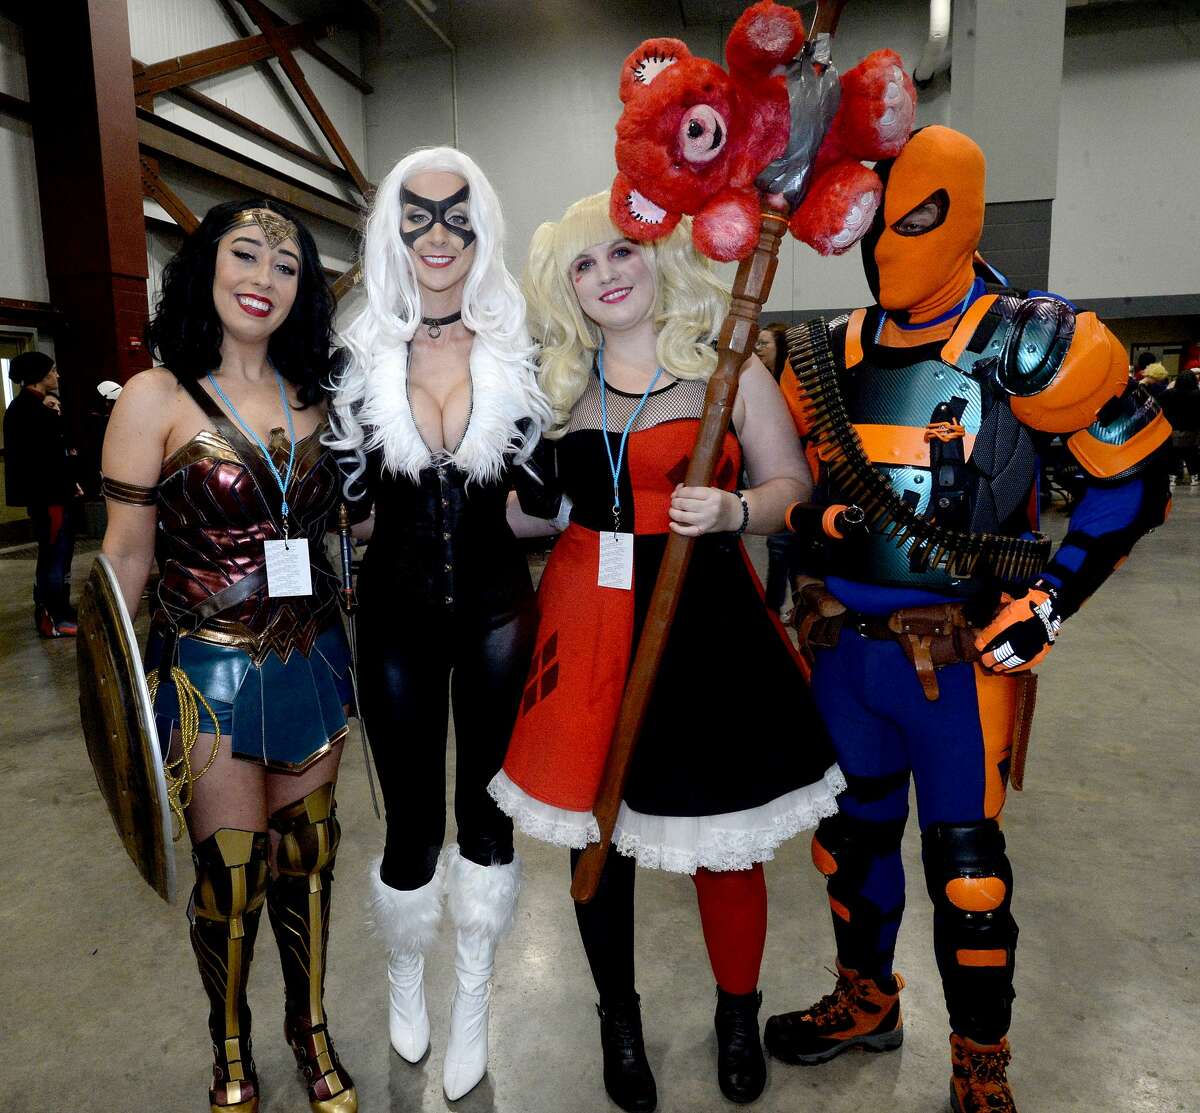 Were you 'Seen' at Beaumont's Comic Con?